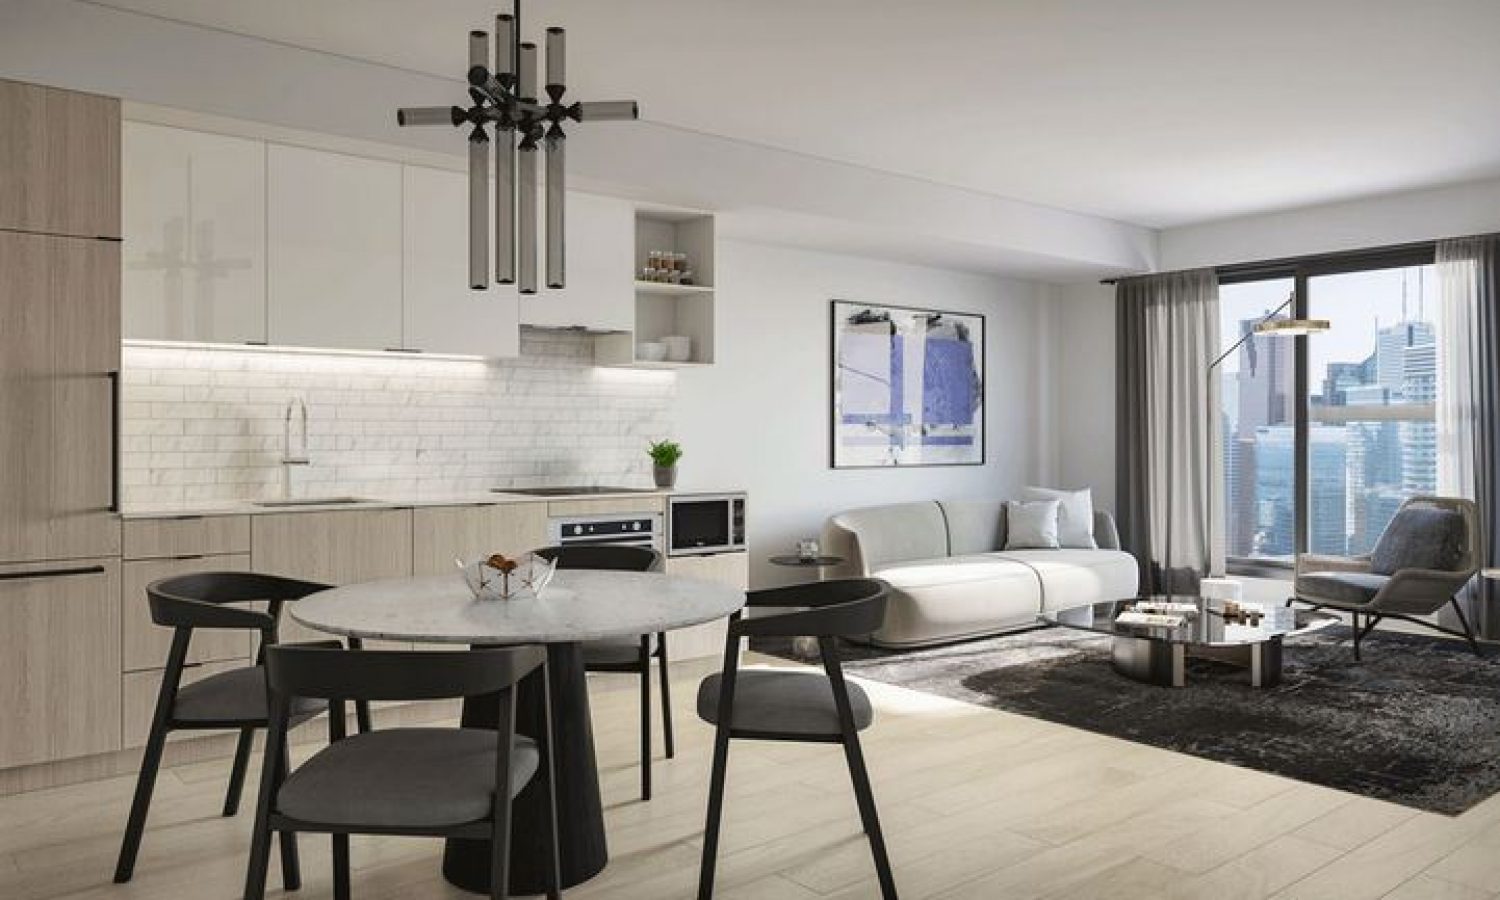 252-church-street-condos-suite-interior-with-living-and-kitchen-space-9-v209